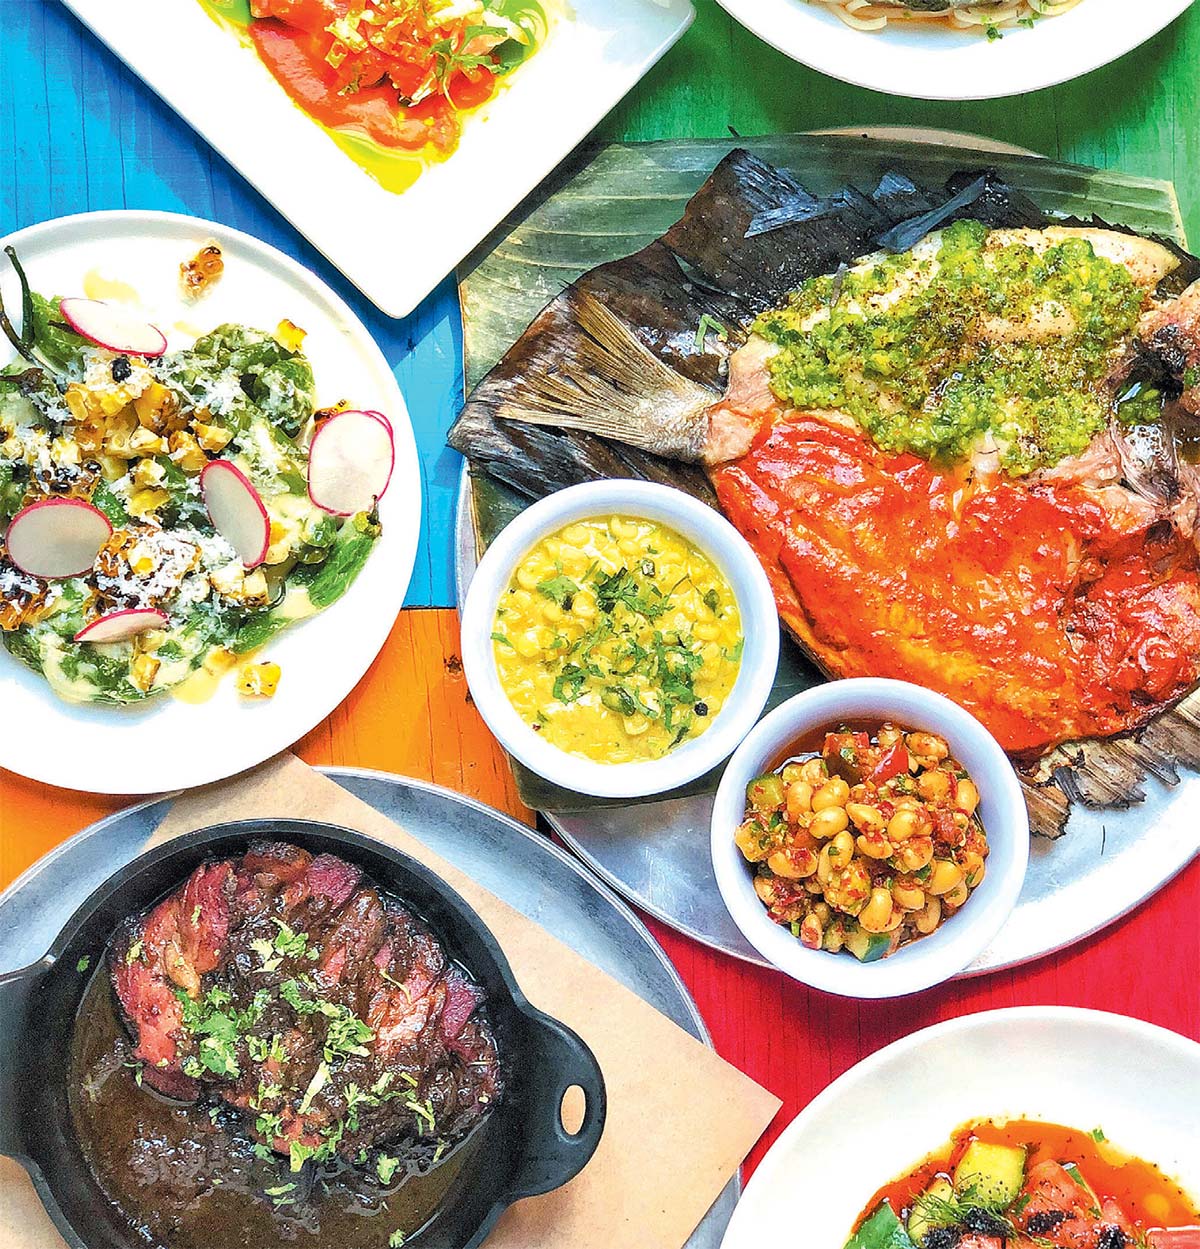 selections from the menu of Mission Taqueria's TACOLAB